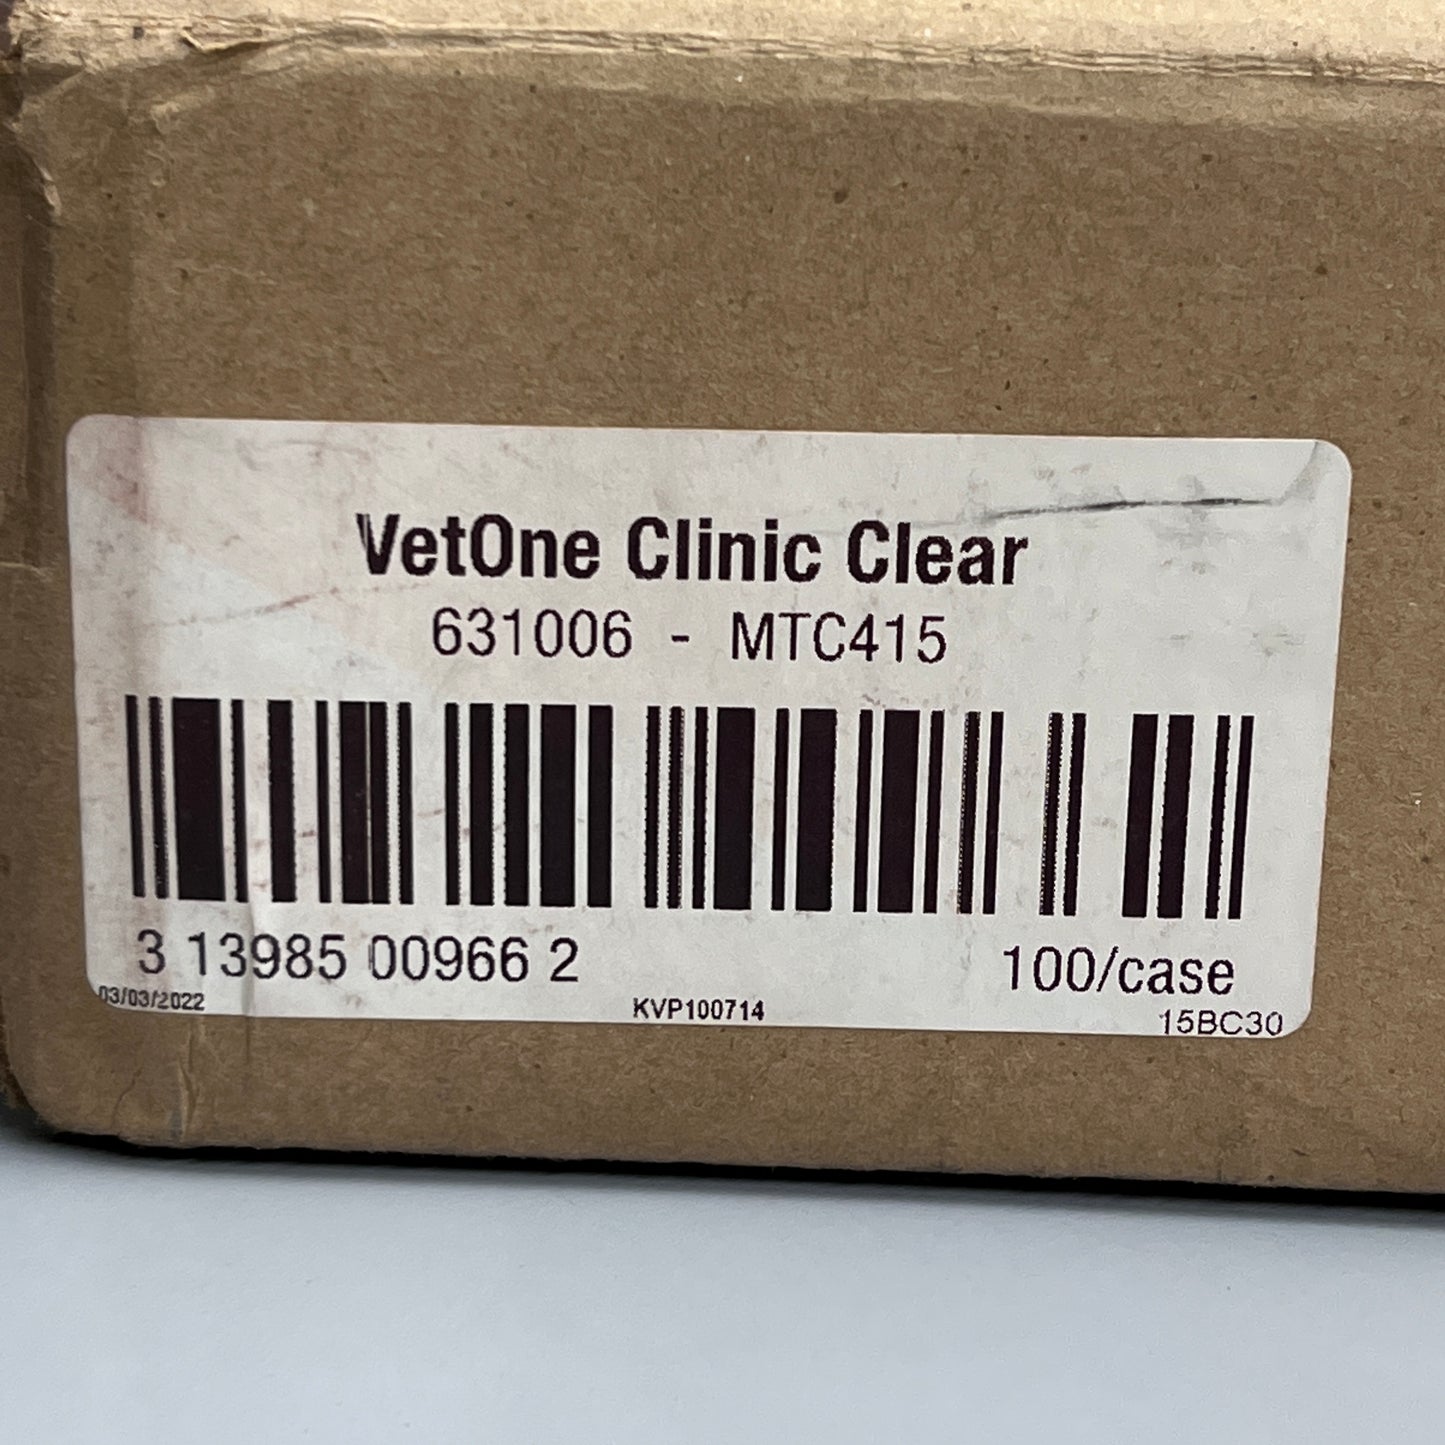 VETONE 100-PK Clinic Clear Collar Cones for dogs V1 631006 (New)